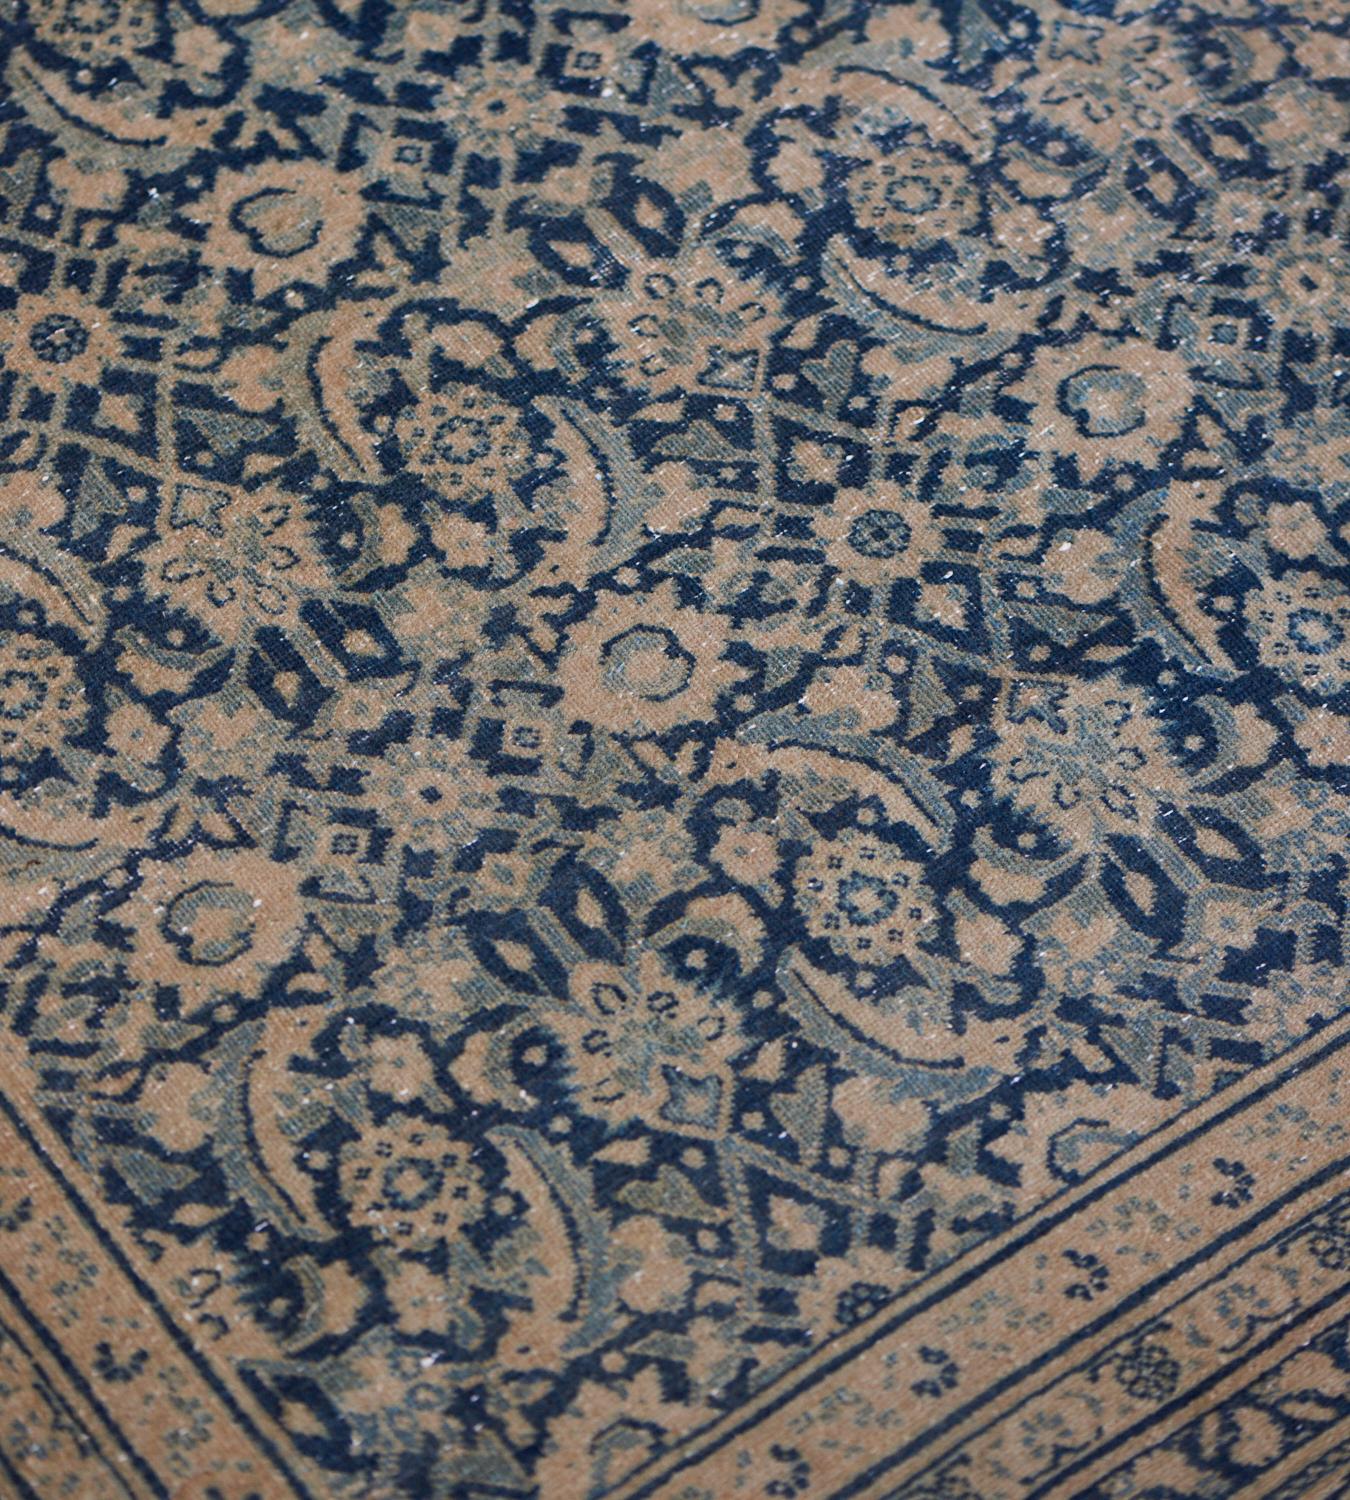 Hand-Woven Antique Circa-1900 Blue Herati-Pattern Authentic Persian Tabriz Rug In Good Condition For Sale In West Hollywood, CA